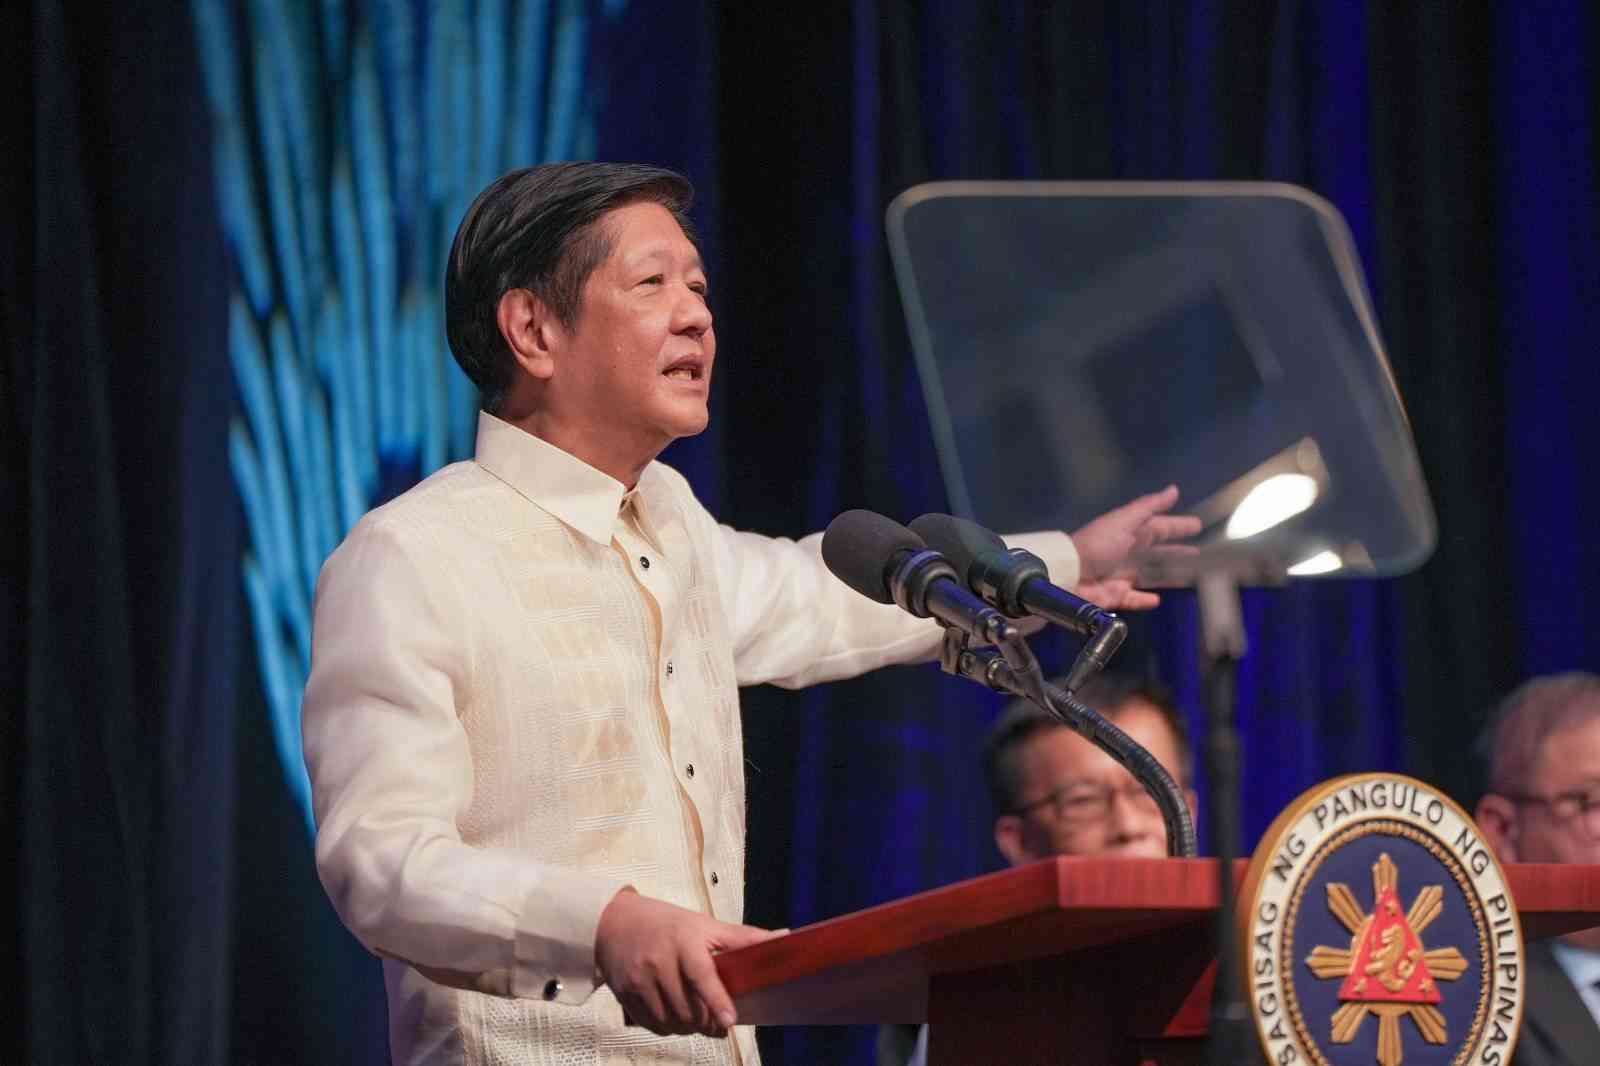 PCO alarmed by deepfake audio of PBBM directing attack vs. foreign country